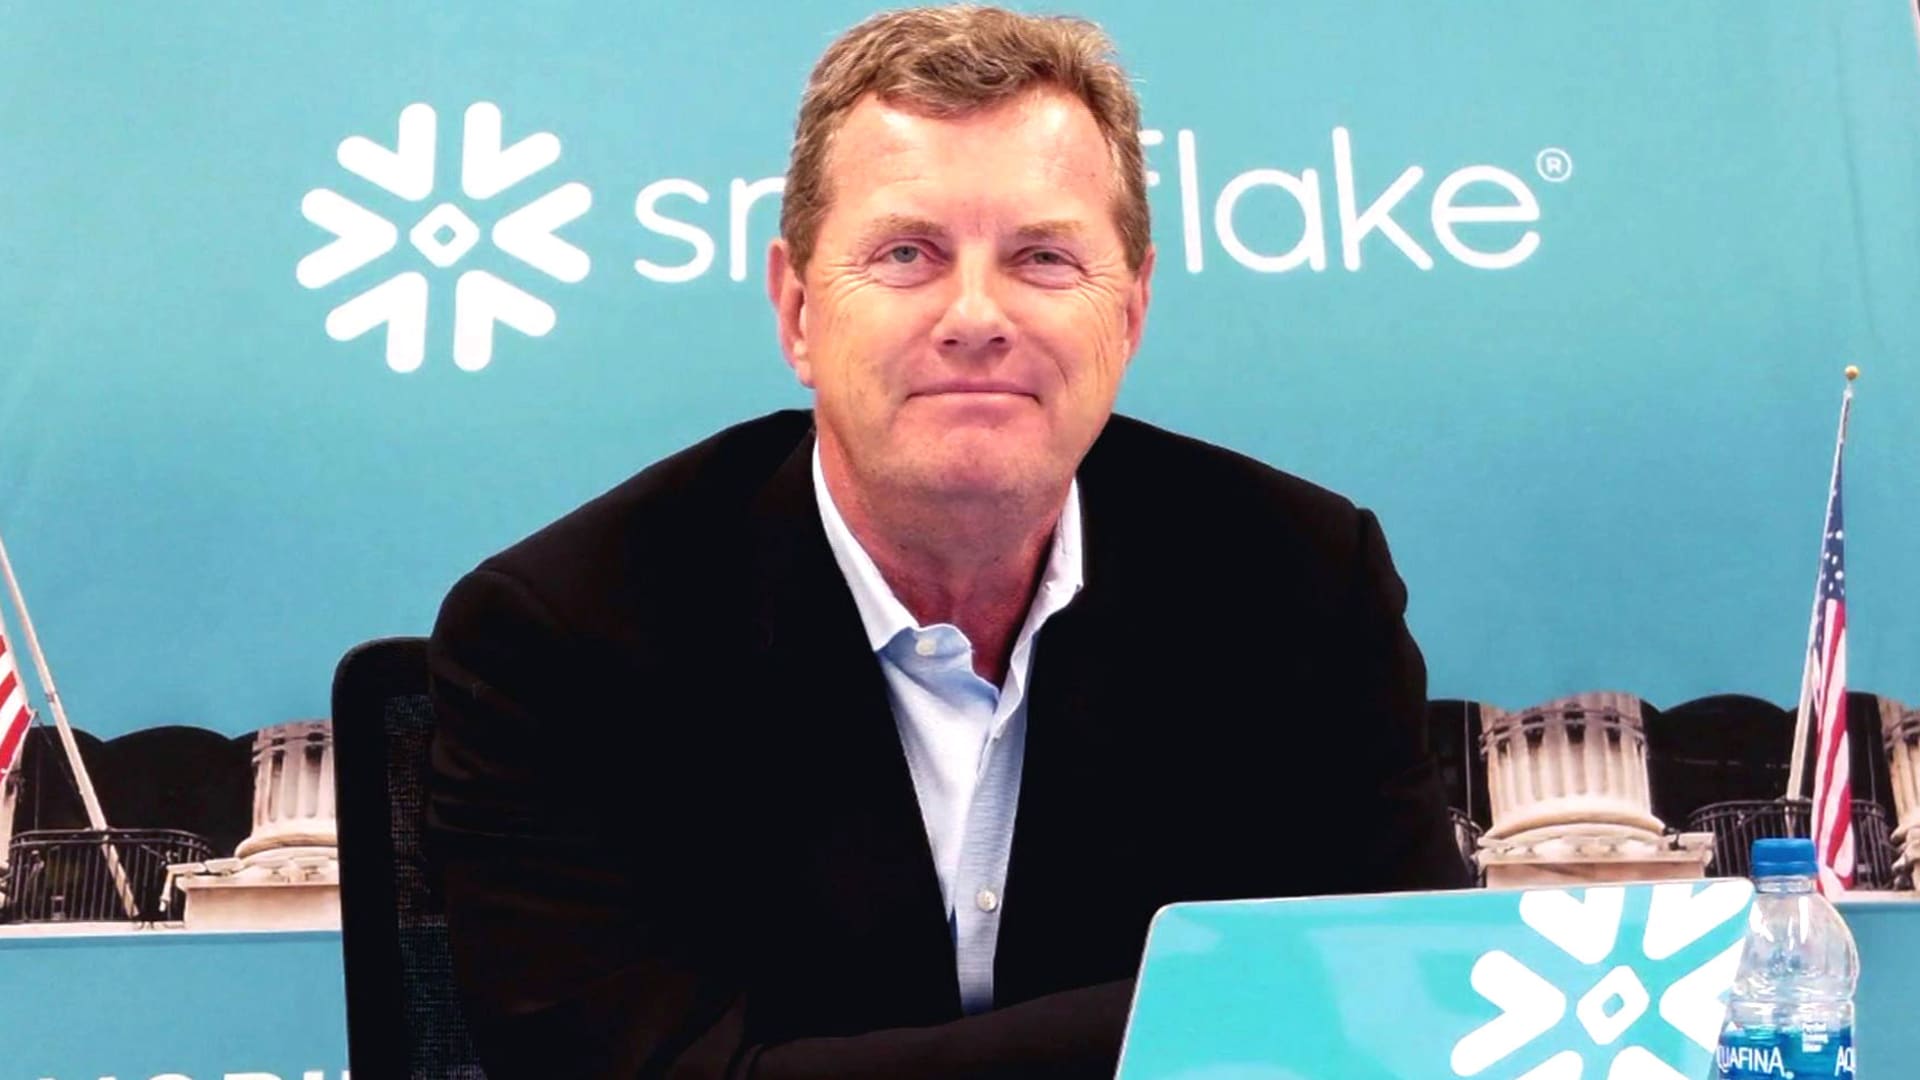 Snowflake says Frank Slootman is retiring as CEO, stock plunges 20%